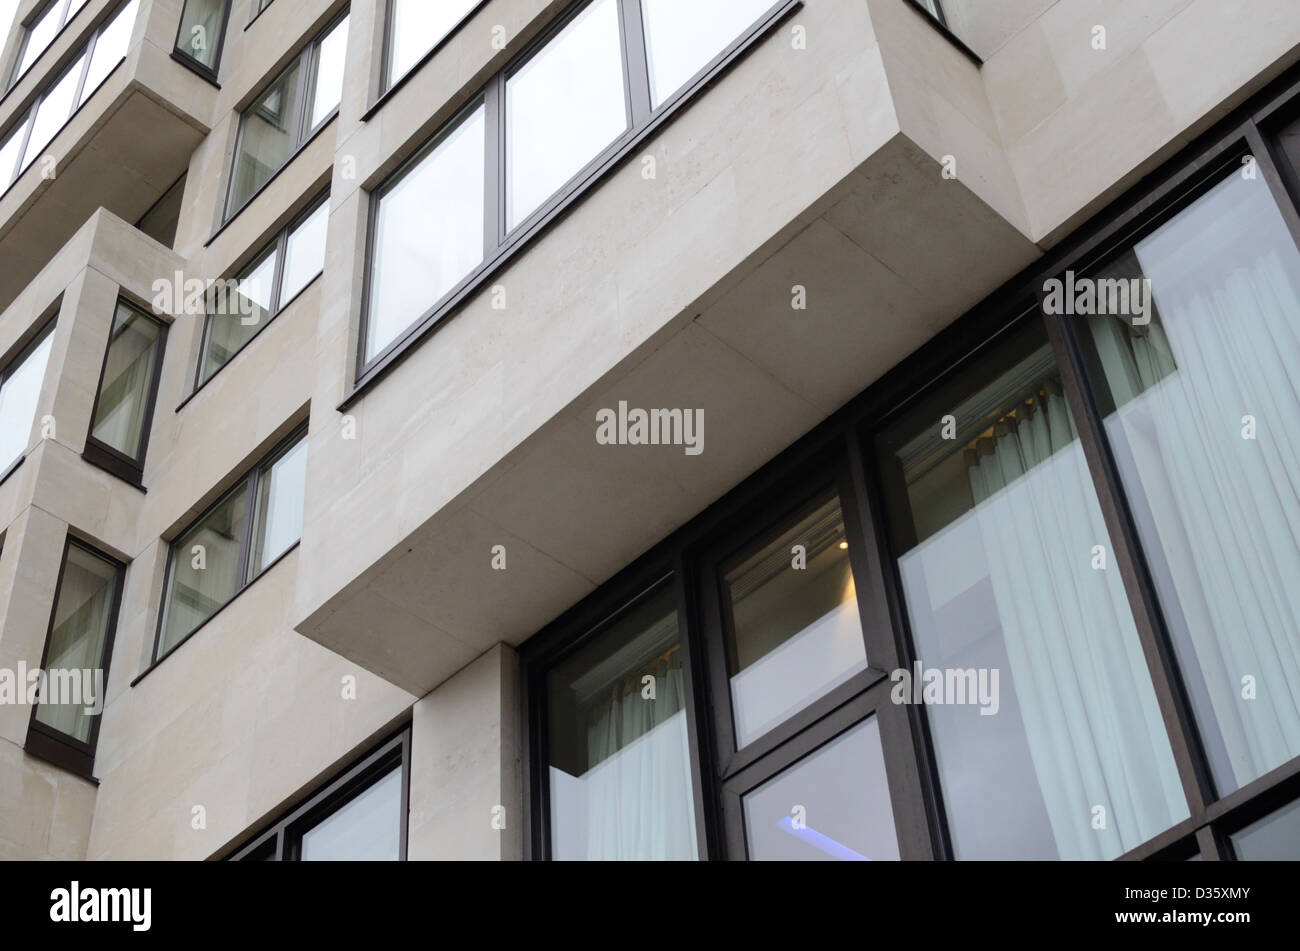 Modern hotel building with protruding sections, London, UK Stock Photo